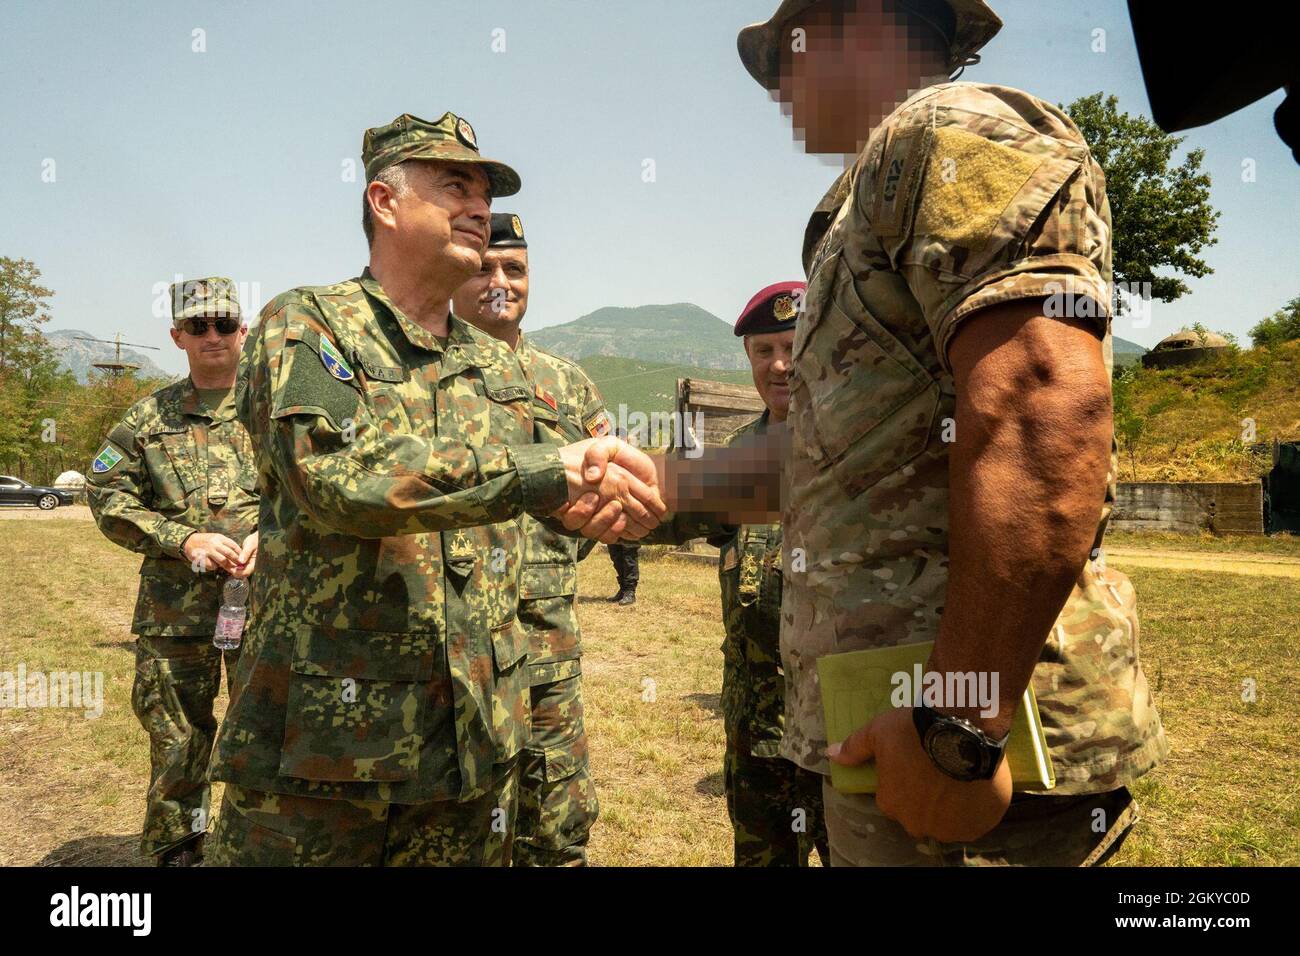 Minister of Defense for the Republic of Albania, Niko Peleshi, observes the  Joint Combined Exchange Training between U.S. Army Green Berets and  Albanian Special Forces, Albania, July 27, 2021. Joint Combined Exchange